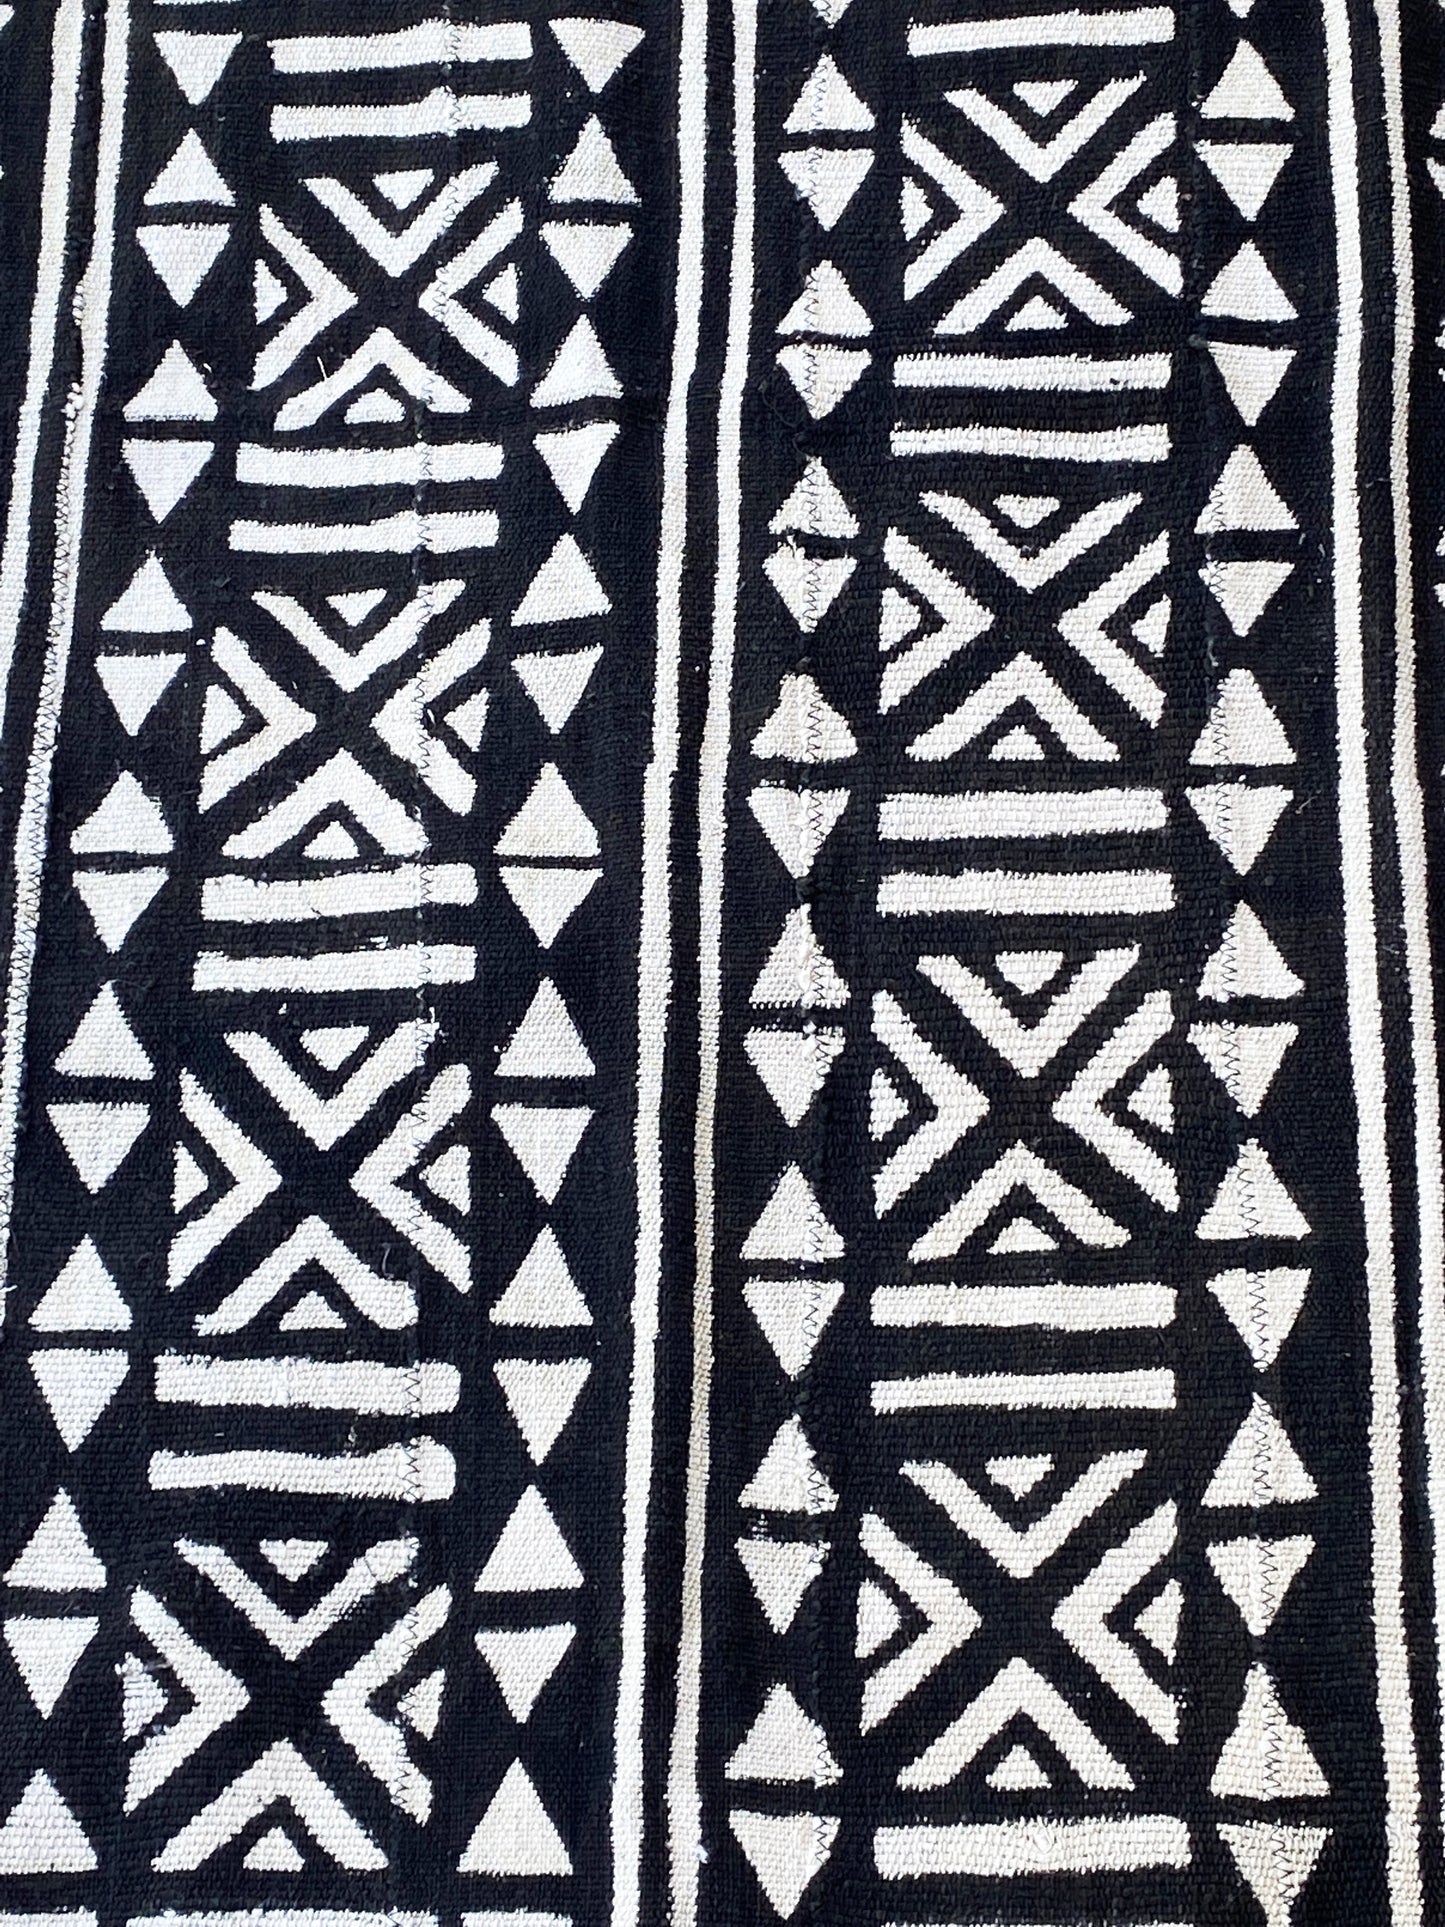 # 3855 African Black and White Mud Cloth Textile Mali